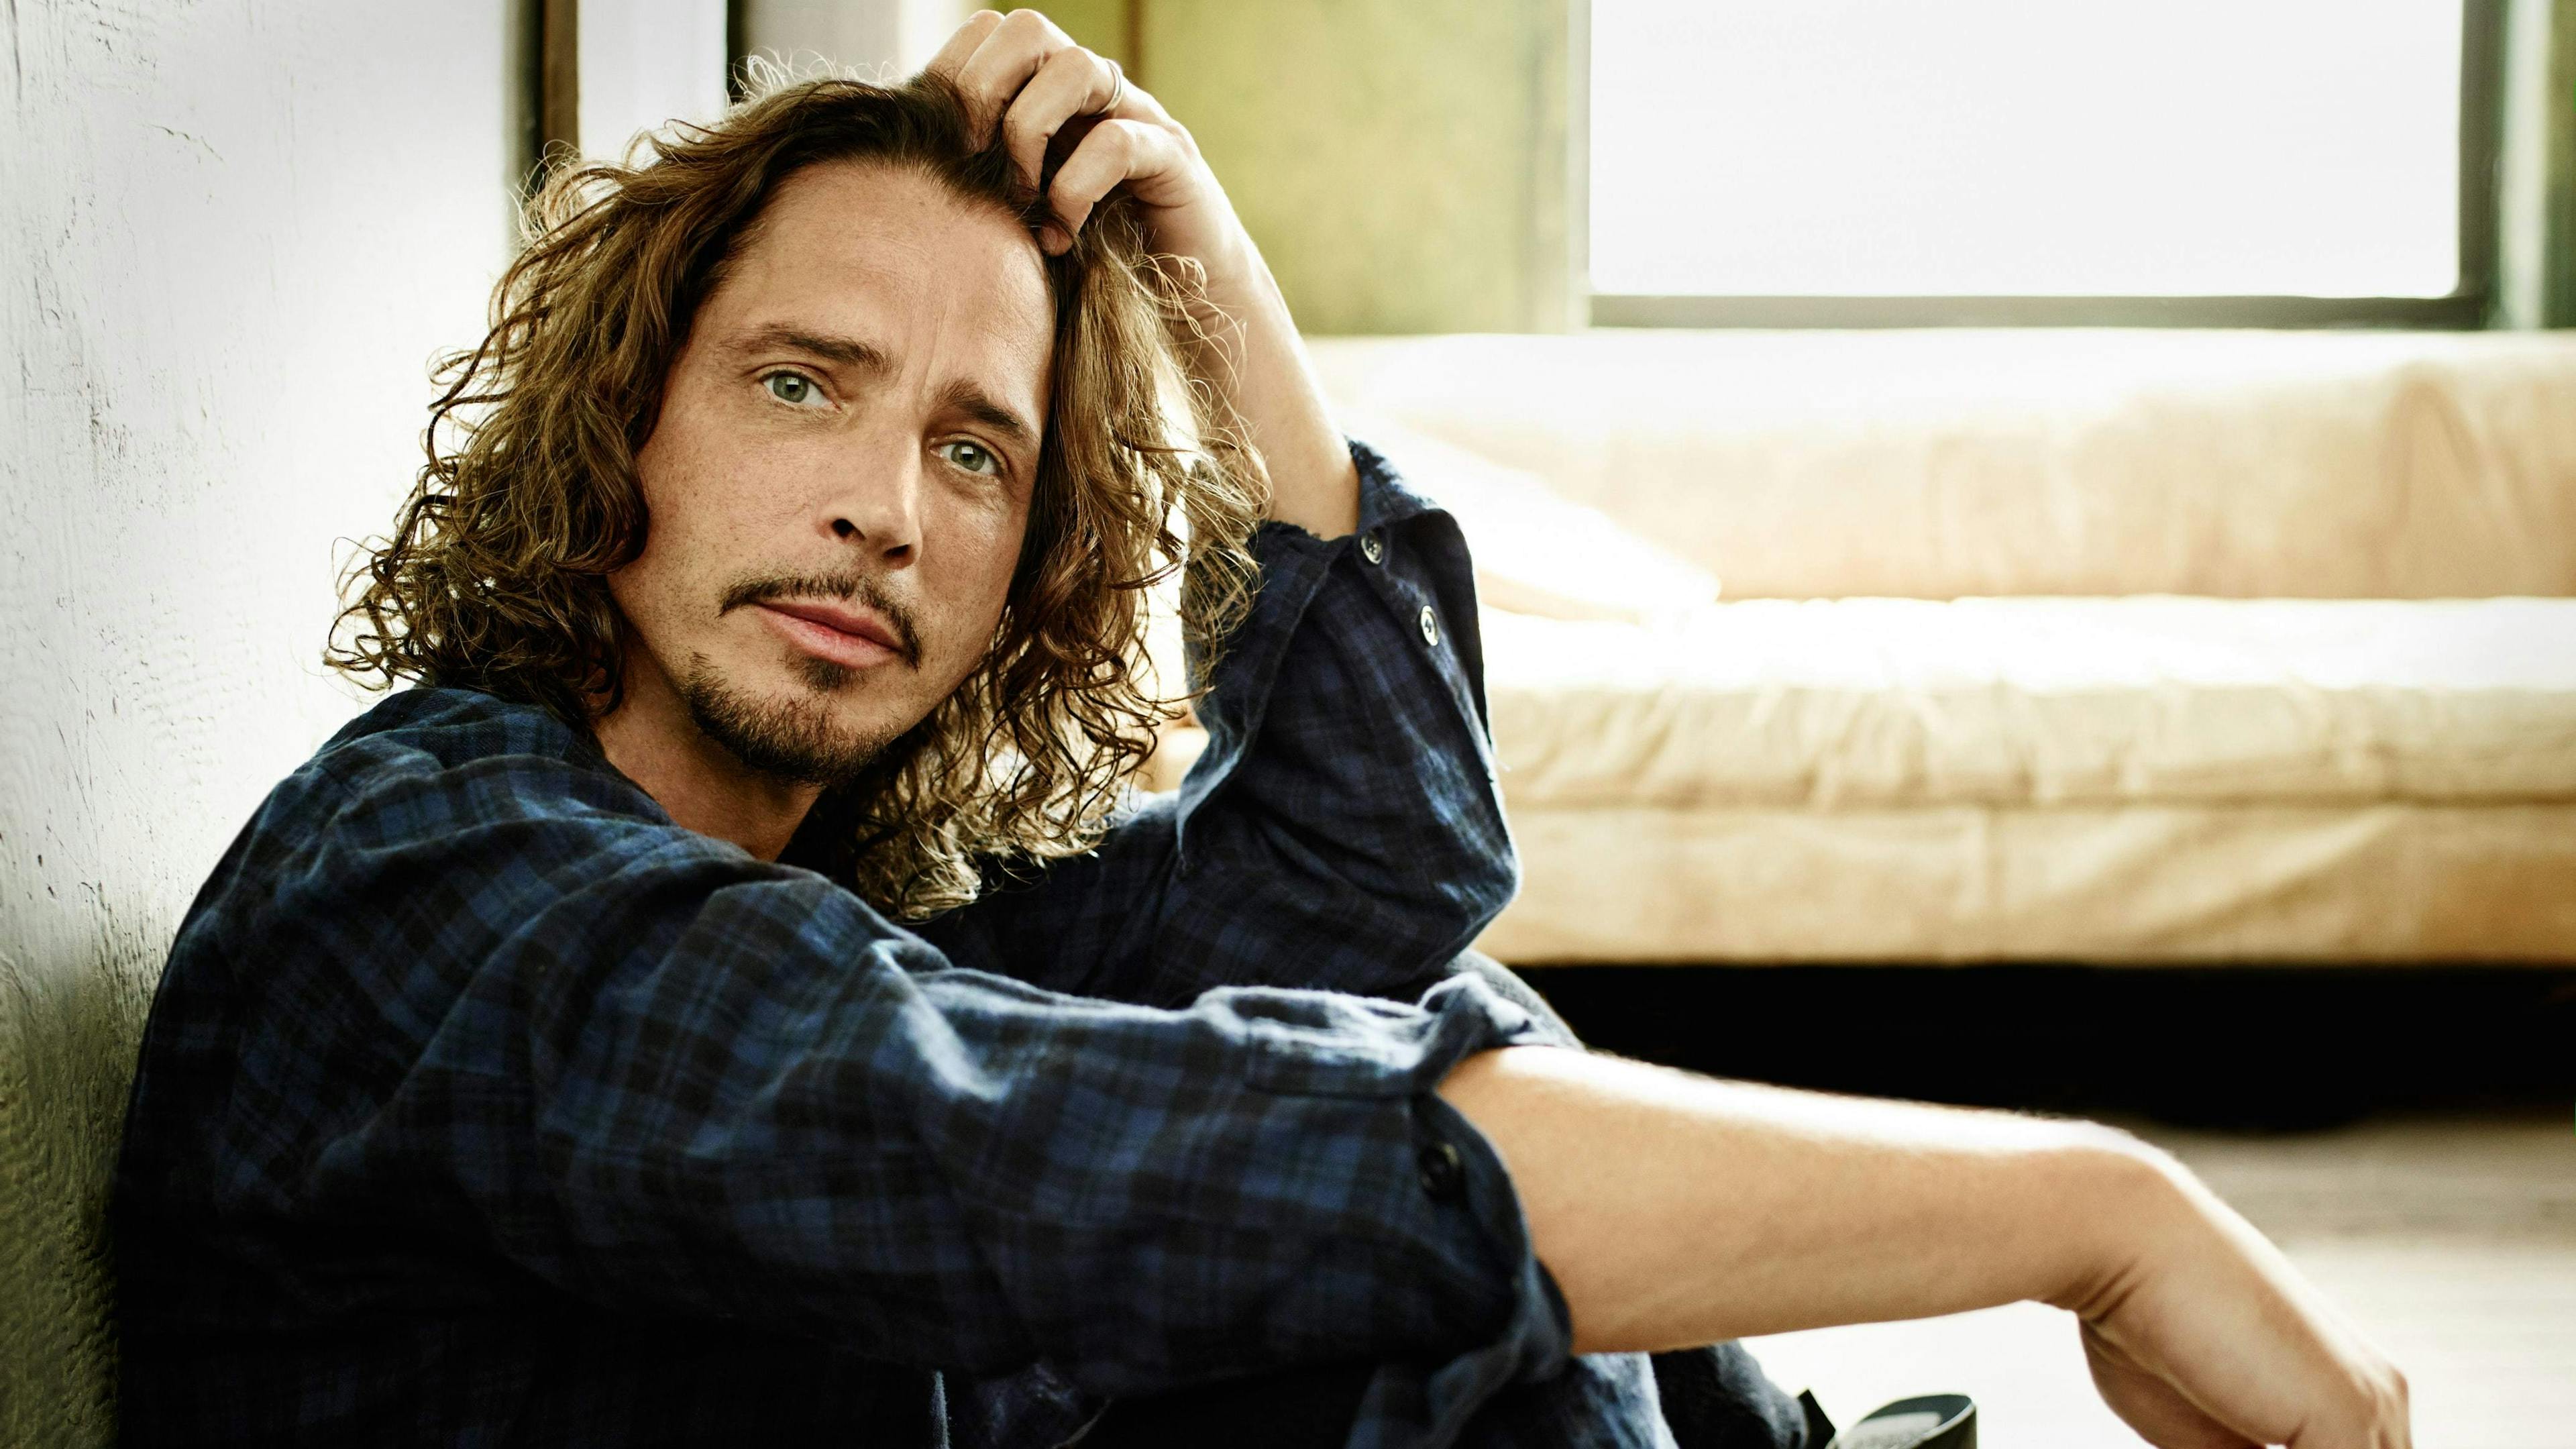 Chris Cornell Discusses His Depression And Mental Health In Unearthed 2007 Interview